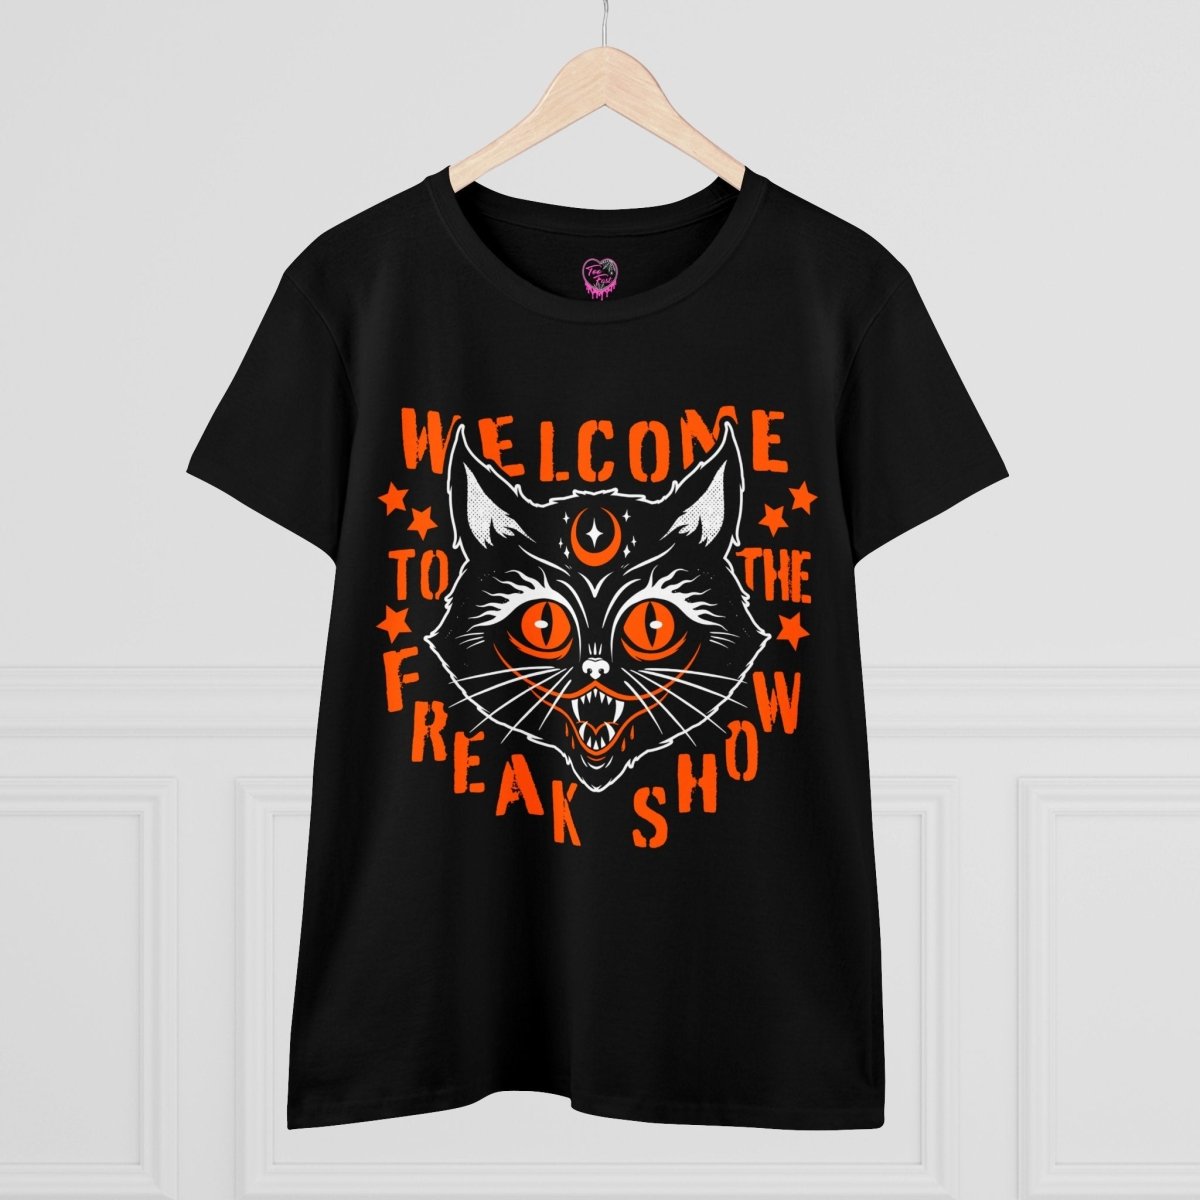 Too Fast | Welcome to the Freak Show Graphic Tee